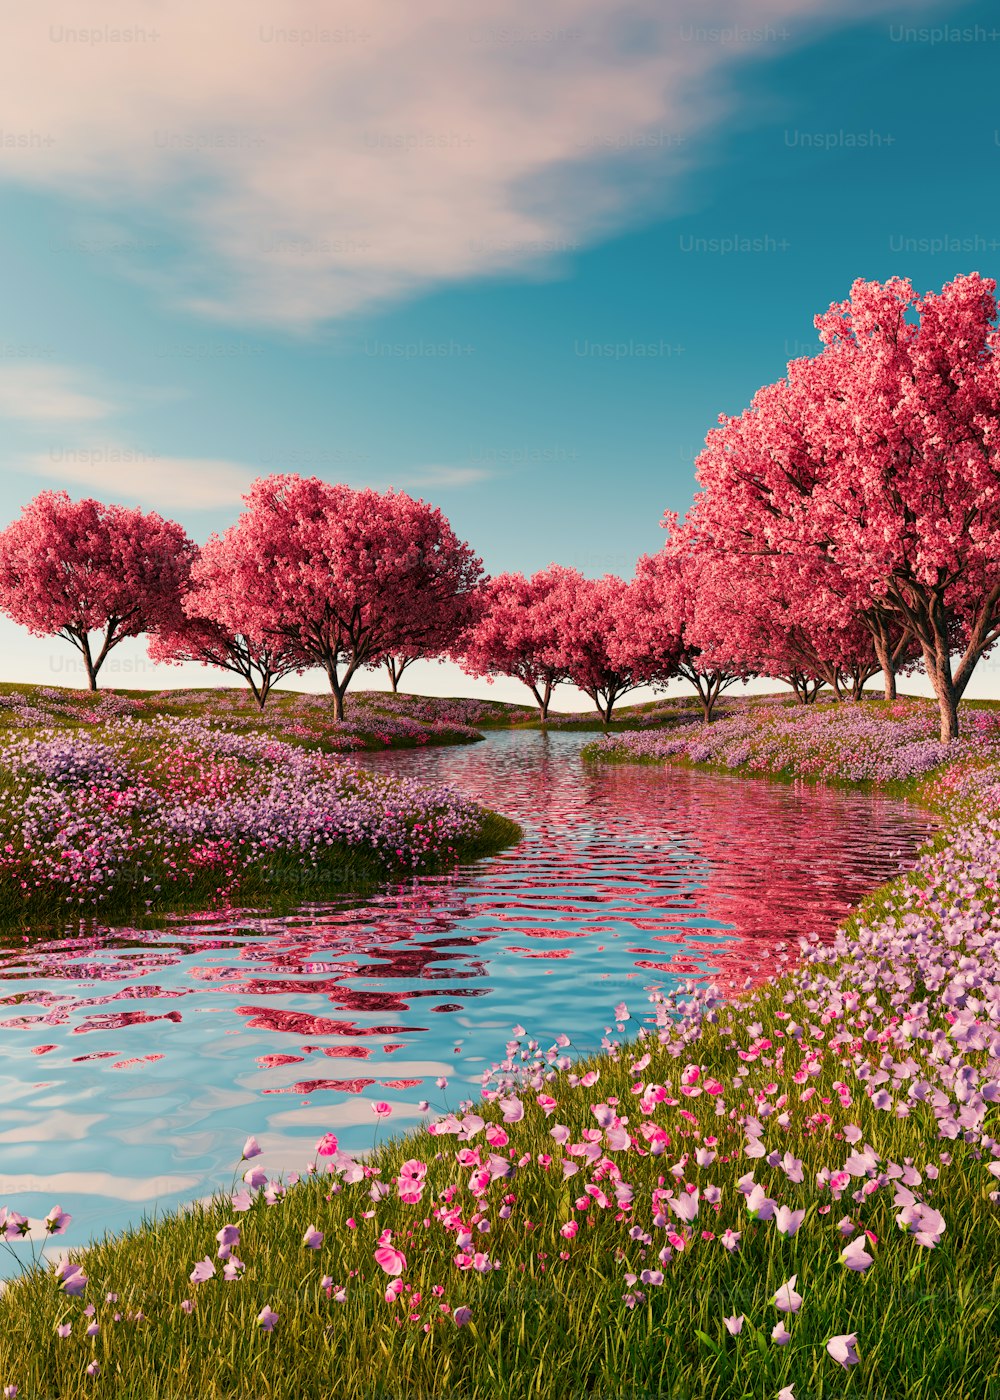 a painting of a river surrounded by pink flowers